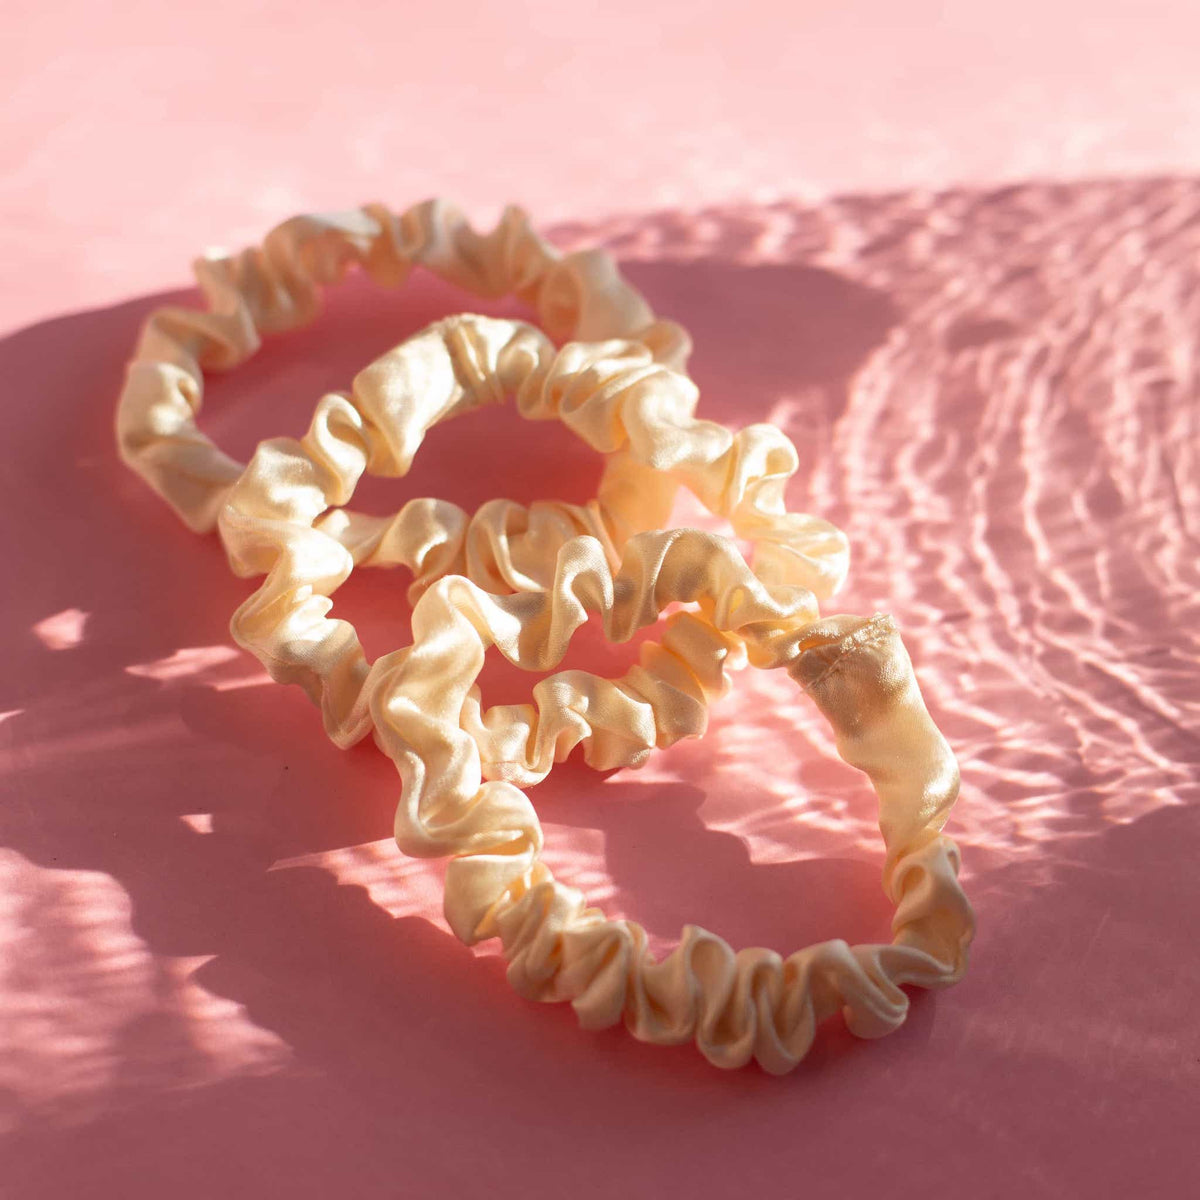 Only Curls Silk Scrunchies - Ivory Mini - Only Curls